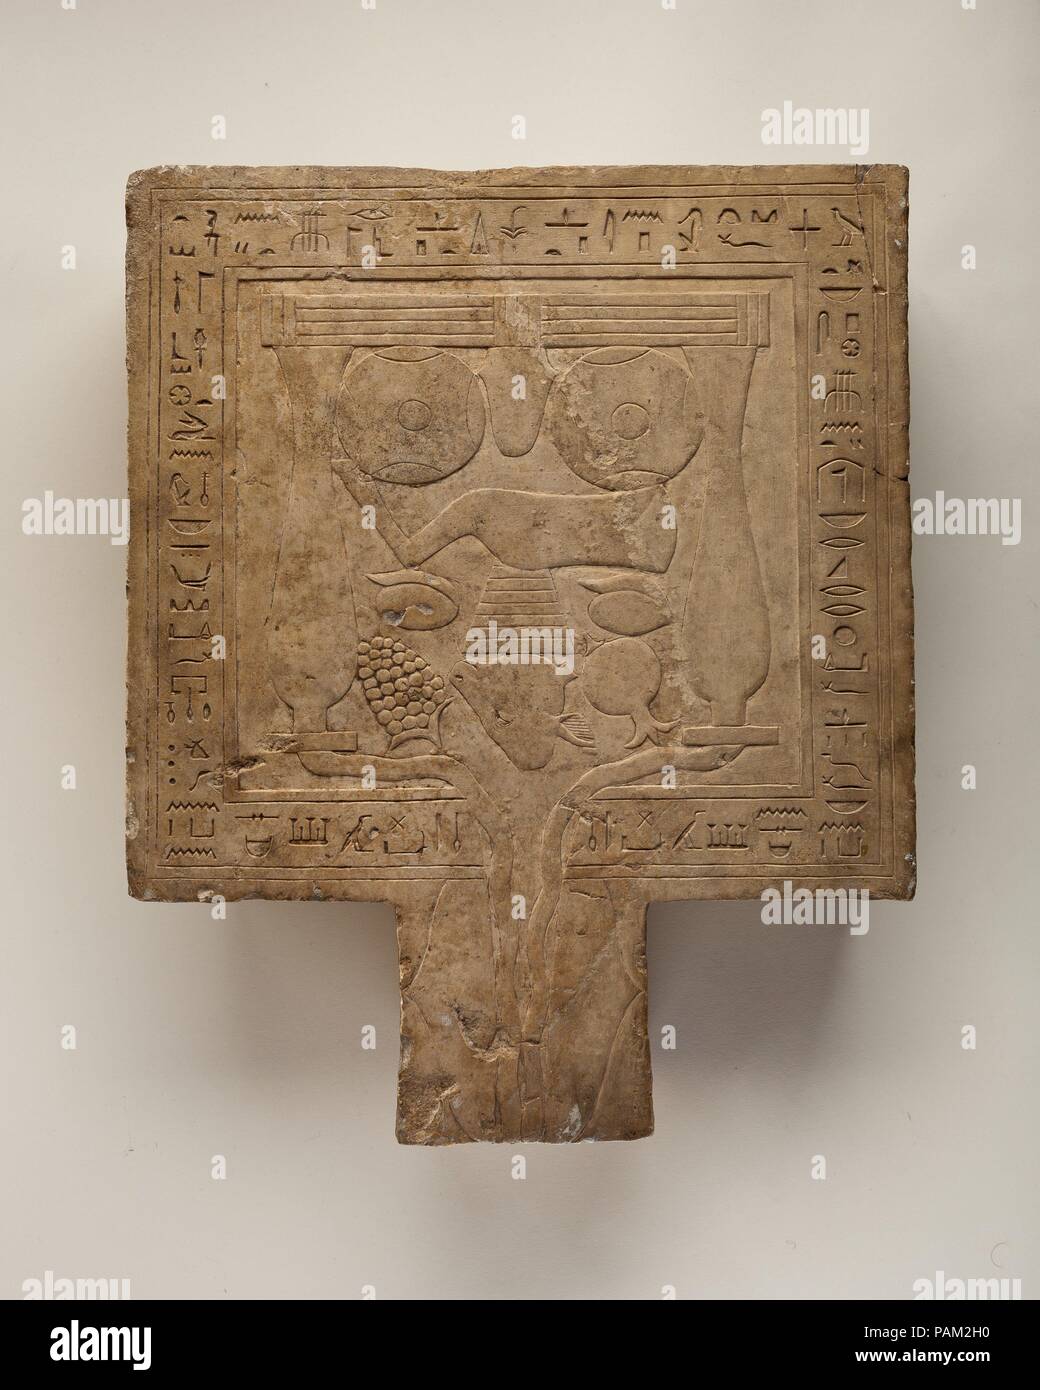 Offrant une table. Dimensions : 44 × L. W. 35 × H. 10,7 cm (17 3/4 x 13 5/16 x 4 3/16 in.). Dynastie DYNASTIE : 27-30. Date : 525-332 B.C.. Musée : Metropolitan Museum of Art, New York, USA. Banque D'Images